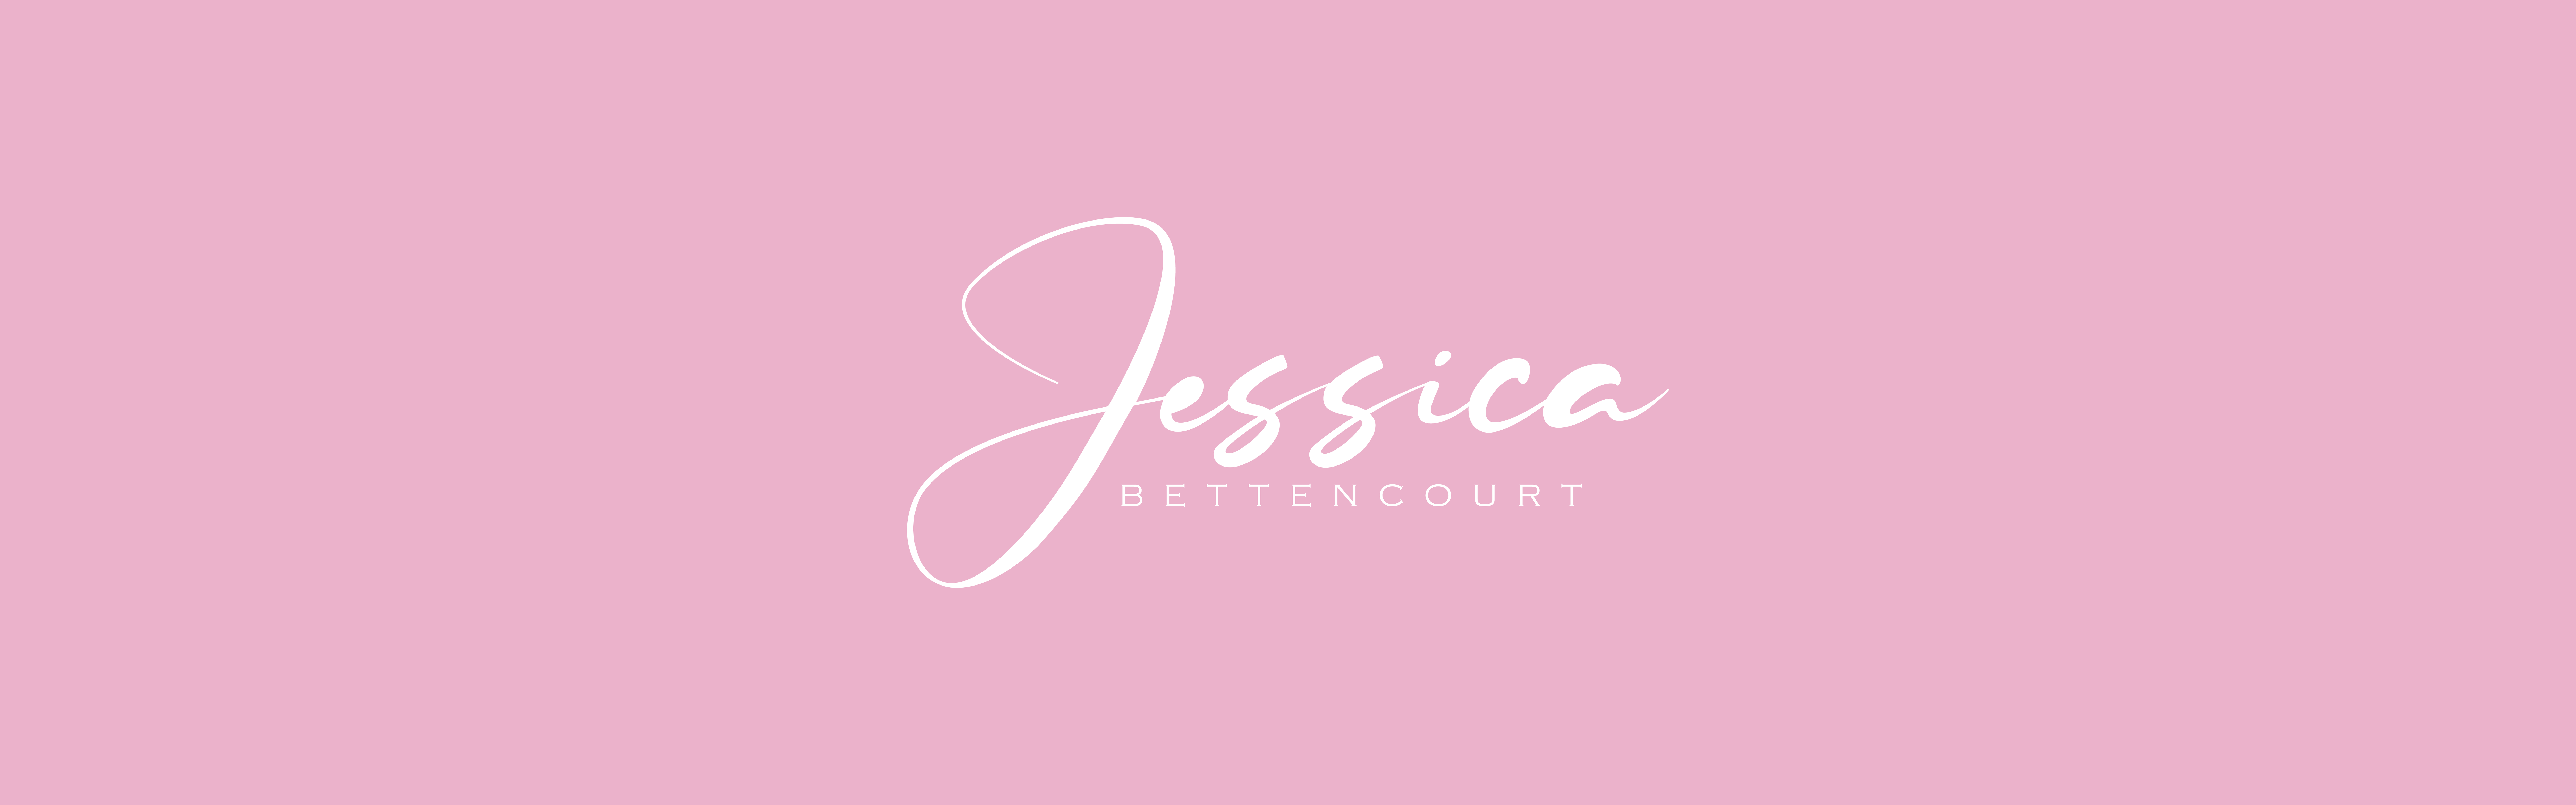 A simple, elegant pink background featuring the name "Jessica Bettencourt" written in a cursive, white font.